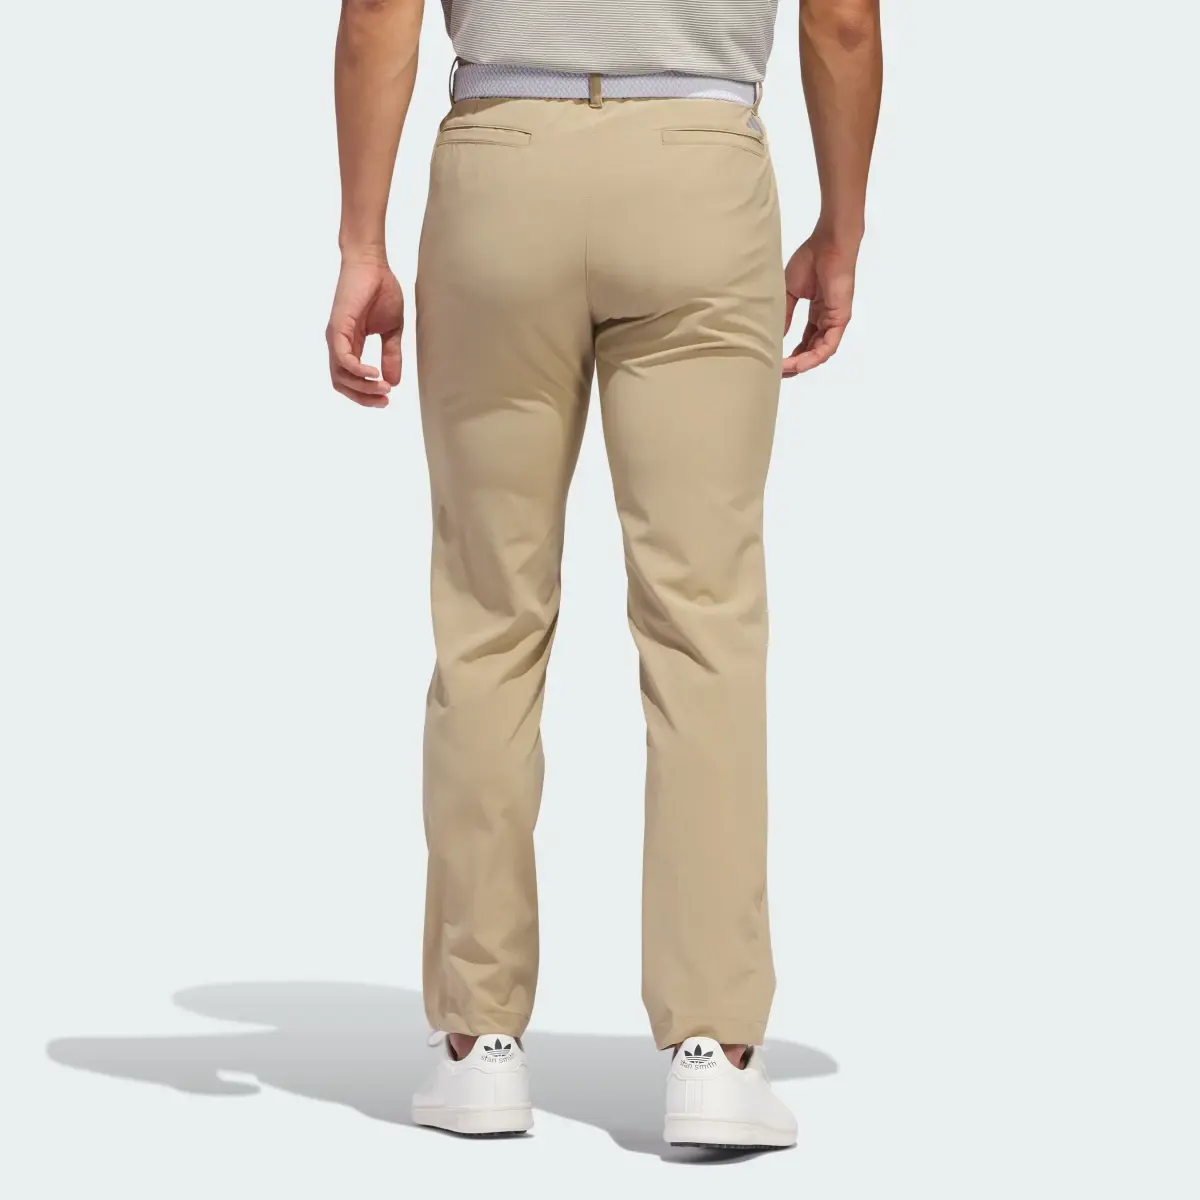 Adidas Ultimate365 Tapered Golfhose. 2